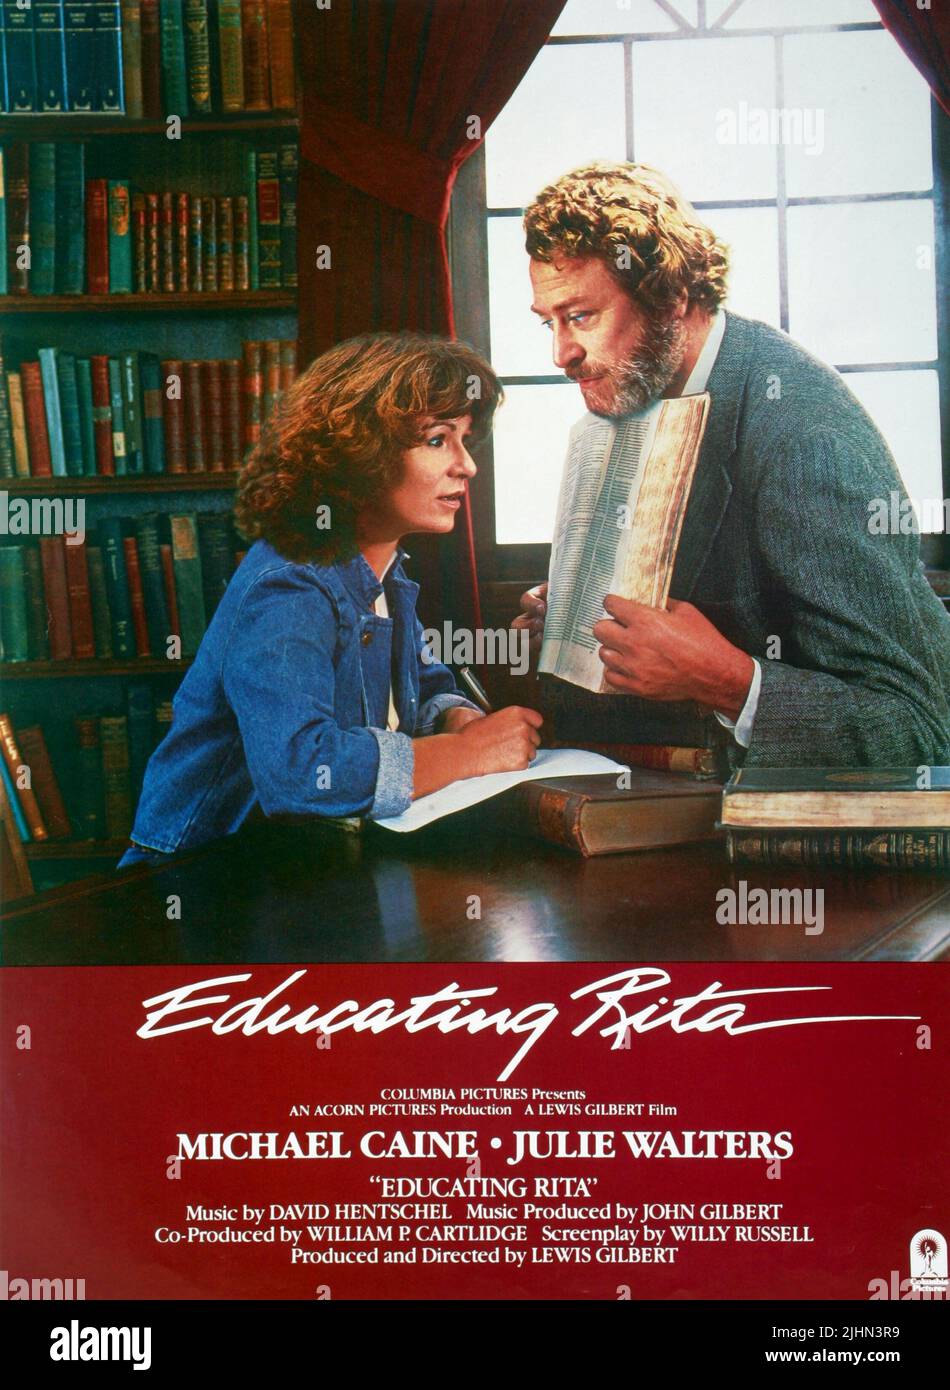 JULIE WALTERS, Michael Caine POSTER, Educating Rita, 1983 Banque D'Images